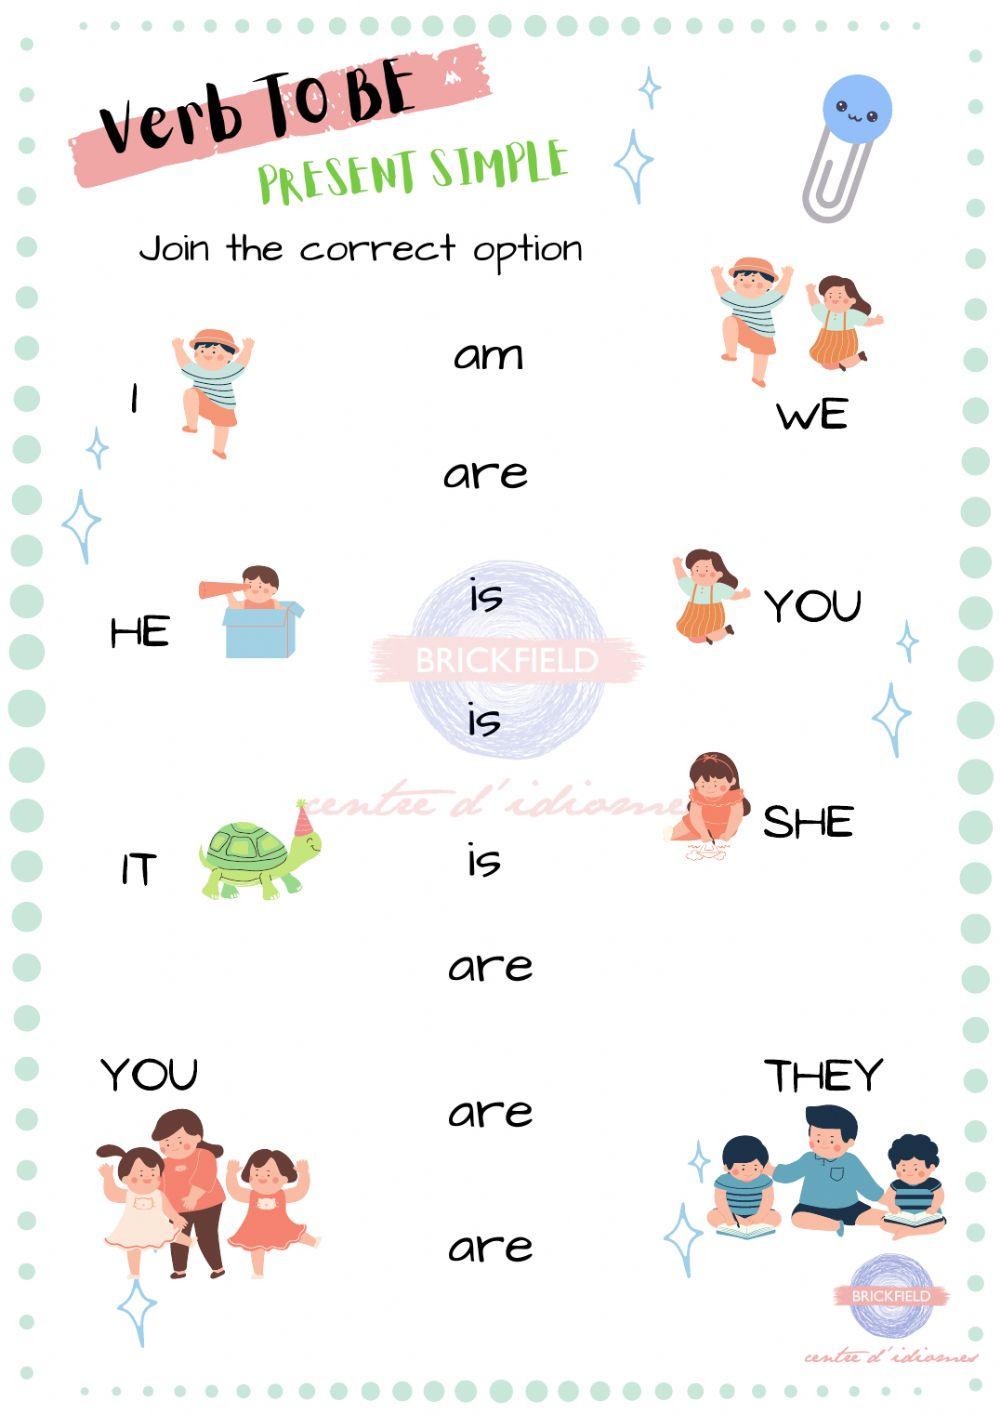 Verb TO BE. Join the correct option